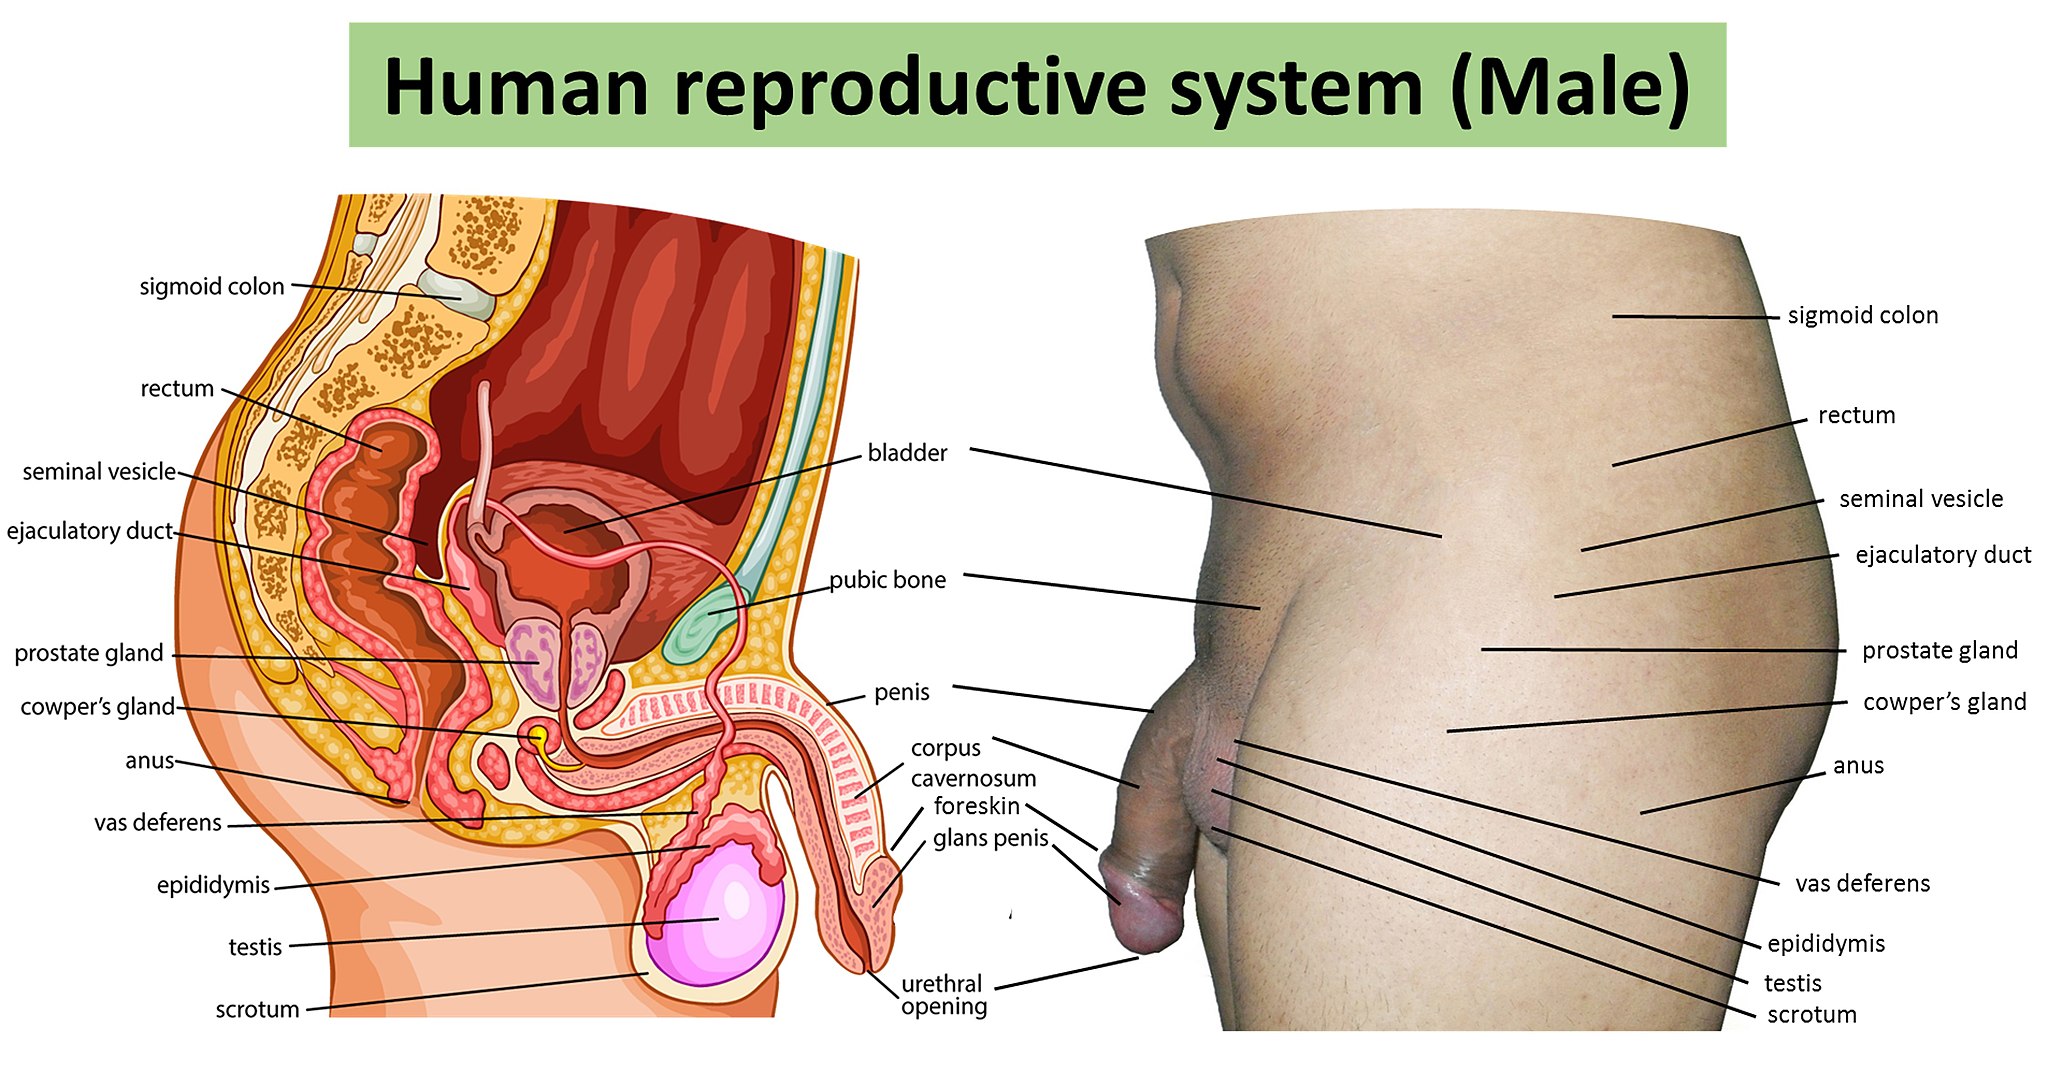 18.3.2 The Male Reproductive System